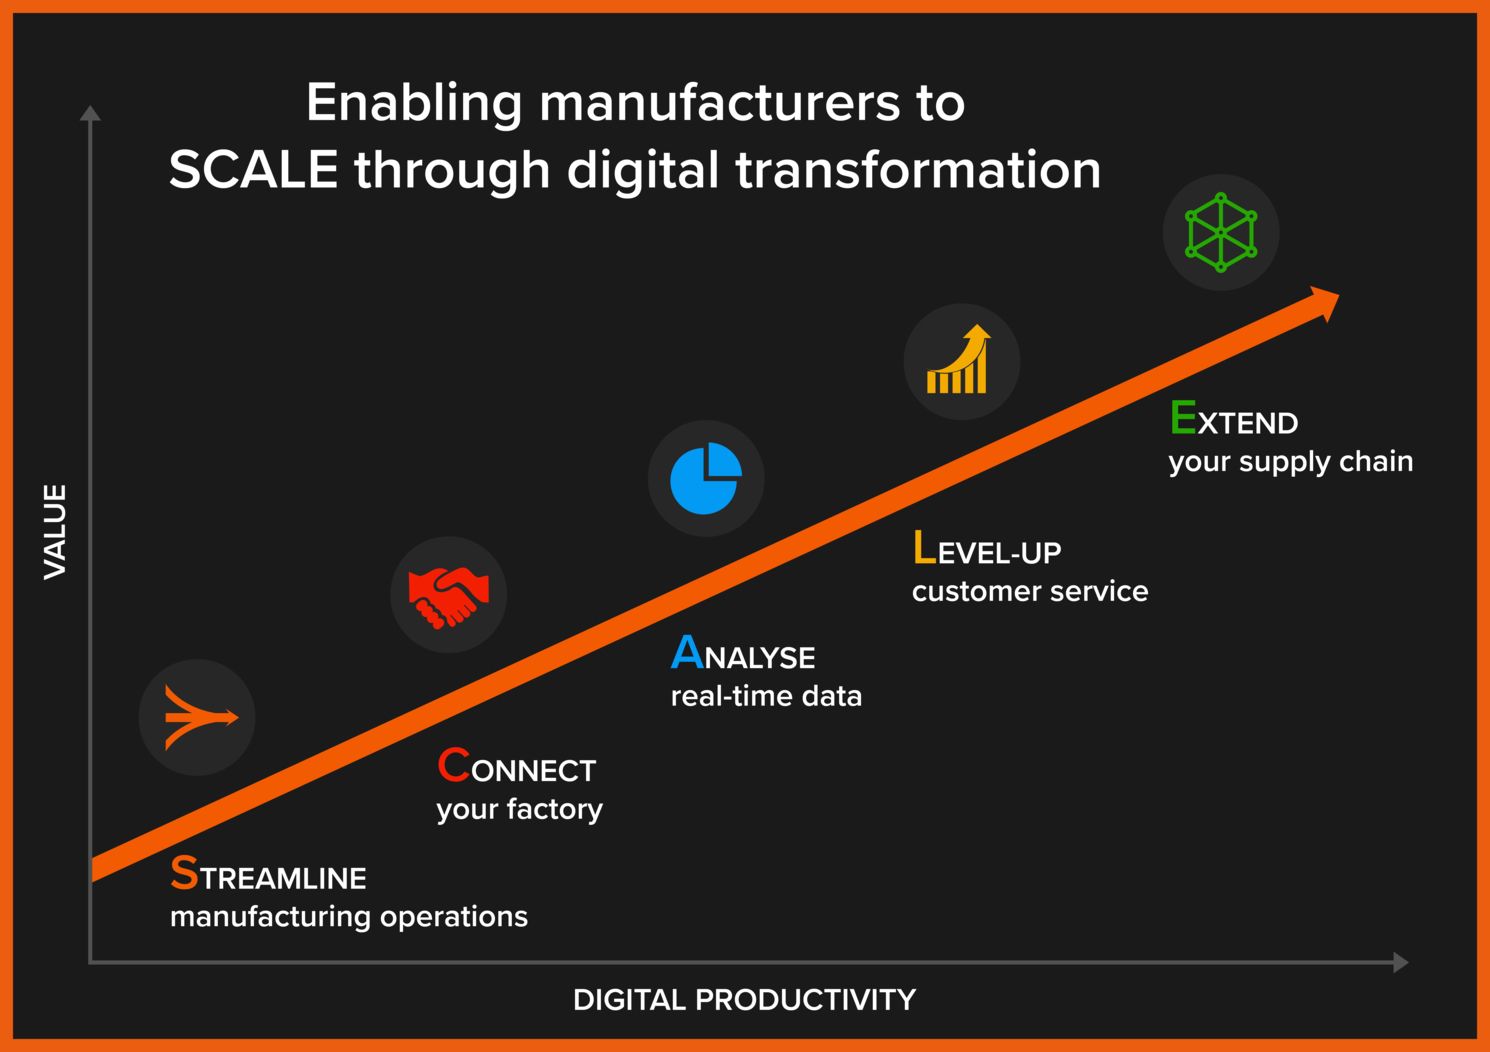 Fitfactory's model to enable manufacturers to SCALE through digital transformation 